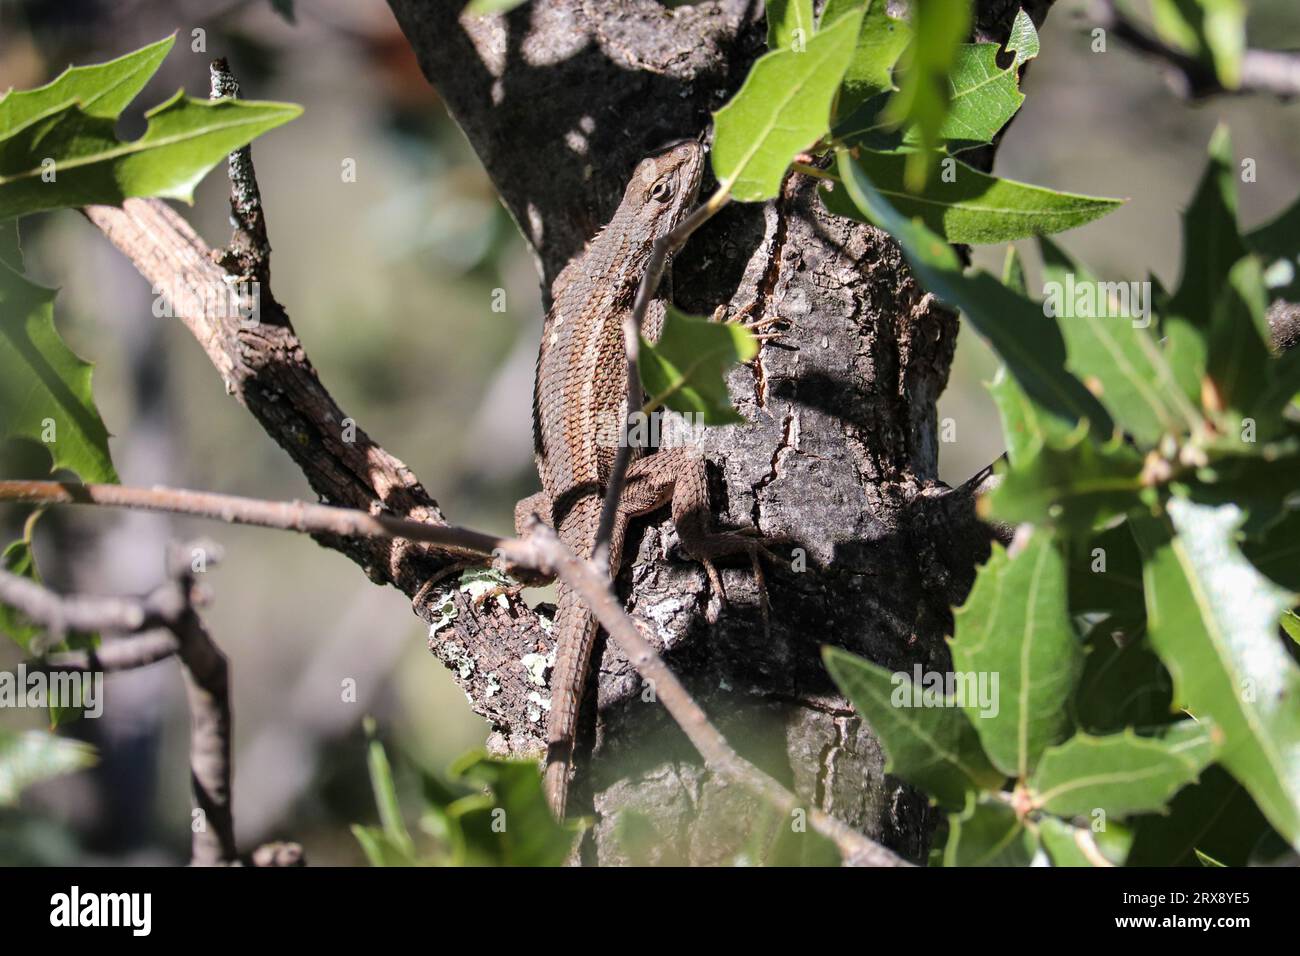 Plateau fence lizard or Sceloporus tristichus climbing in an oak tree at Rumsey Park in Payson, Arizona. Stock Photo